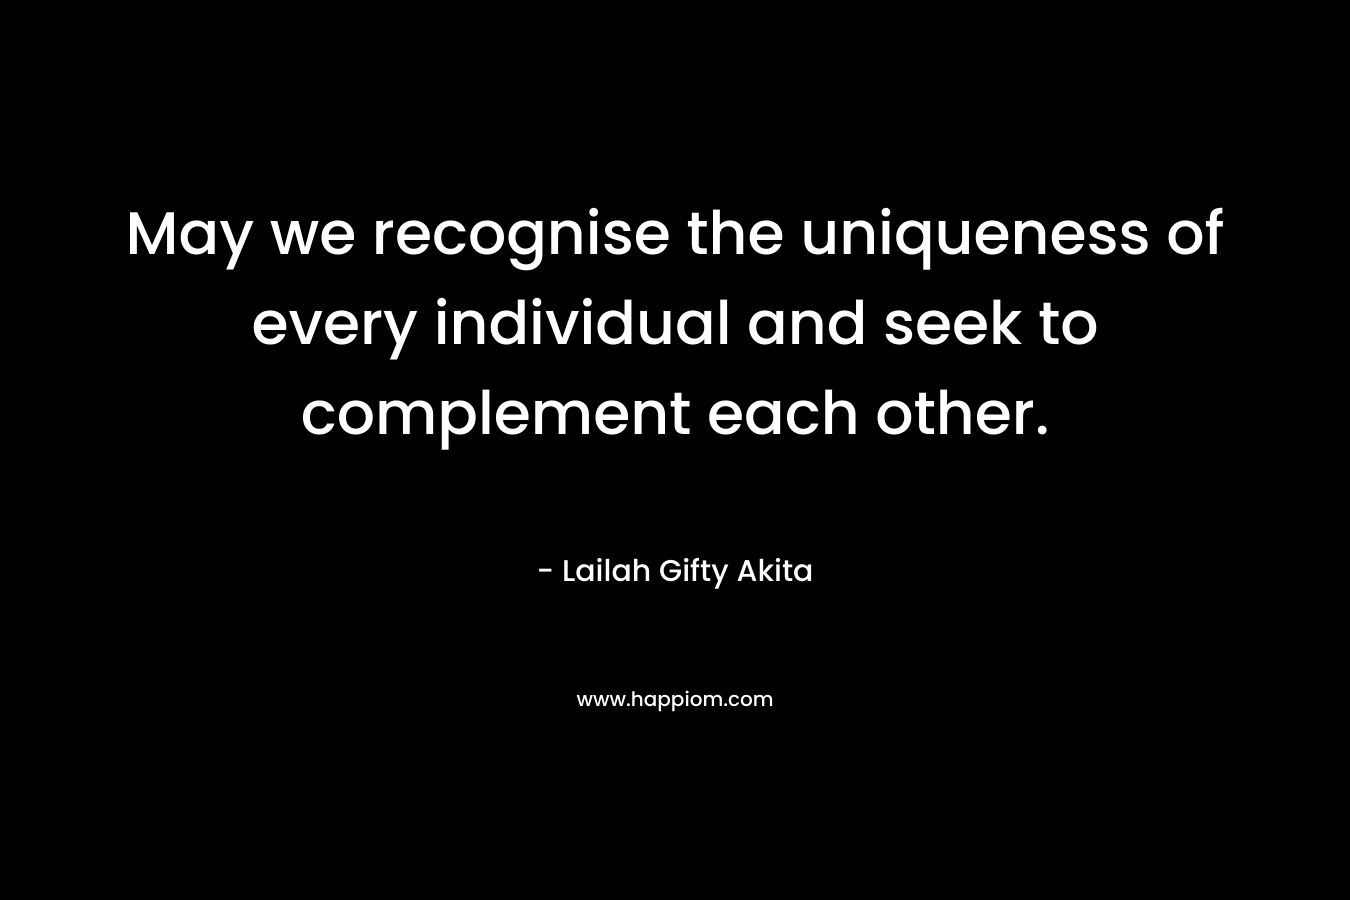 May we recognise the uniqueness of every individual and seek to complement each other. – Lailah Gifty Akita